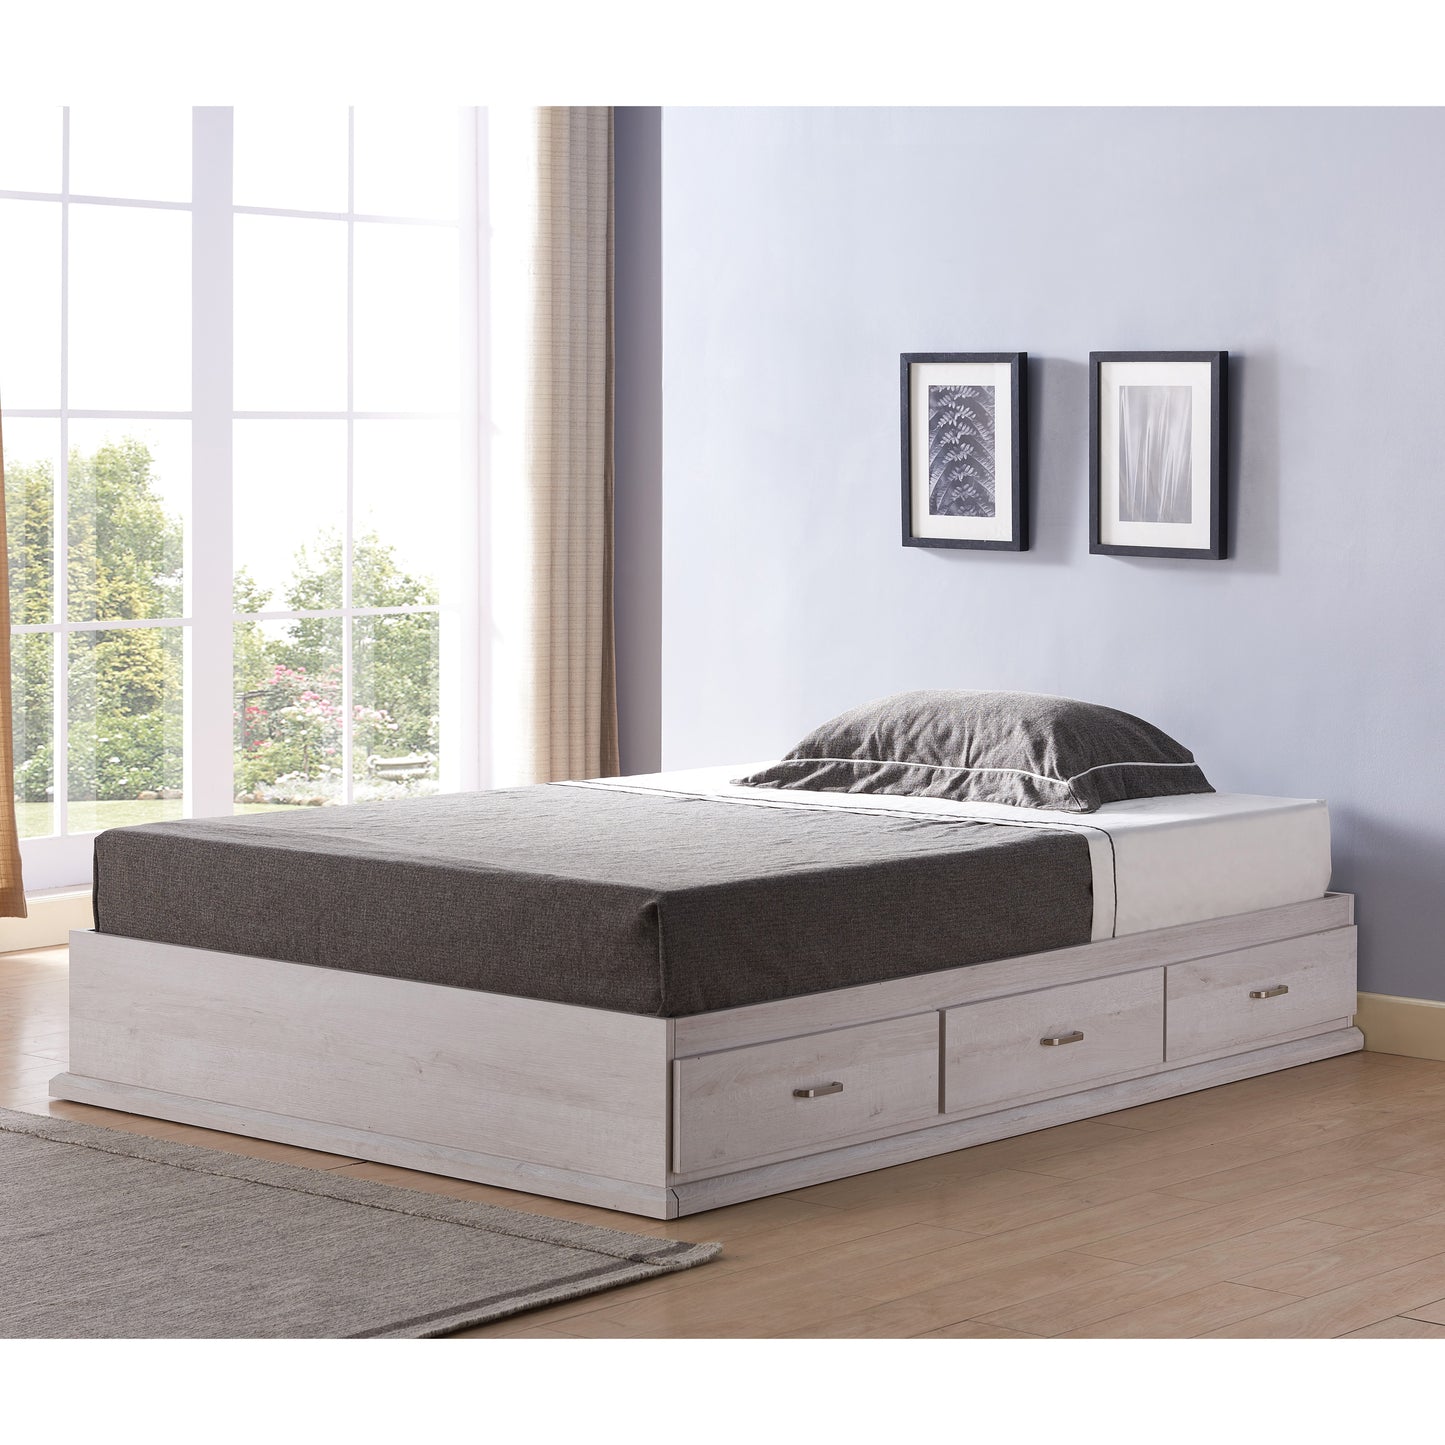 Left angled contemporary three-drawer storage bed in a bedroom with accessories